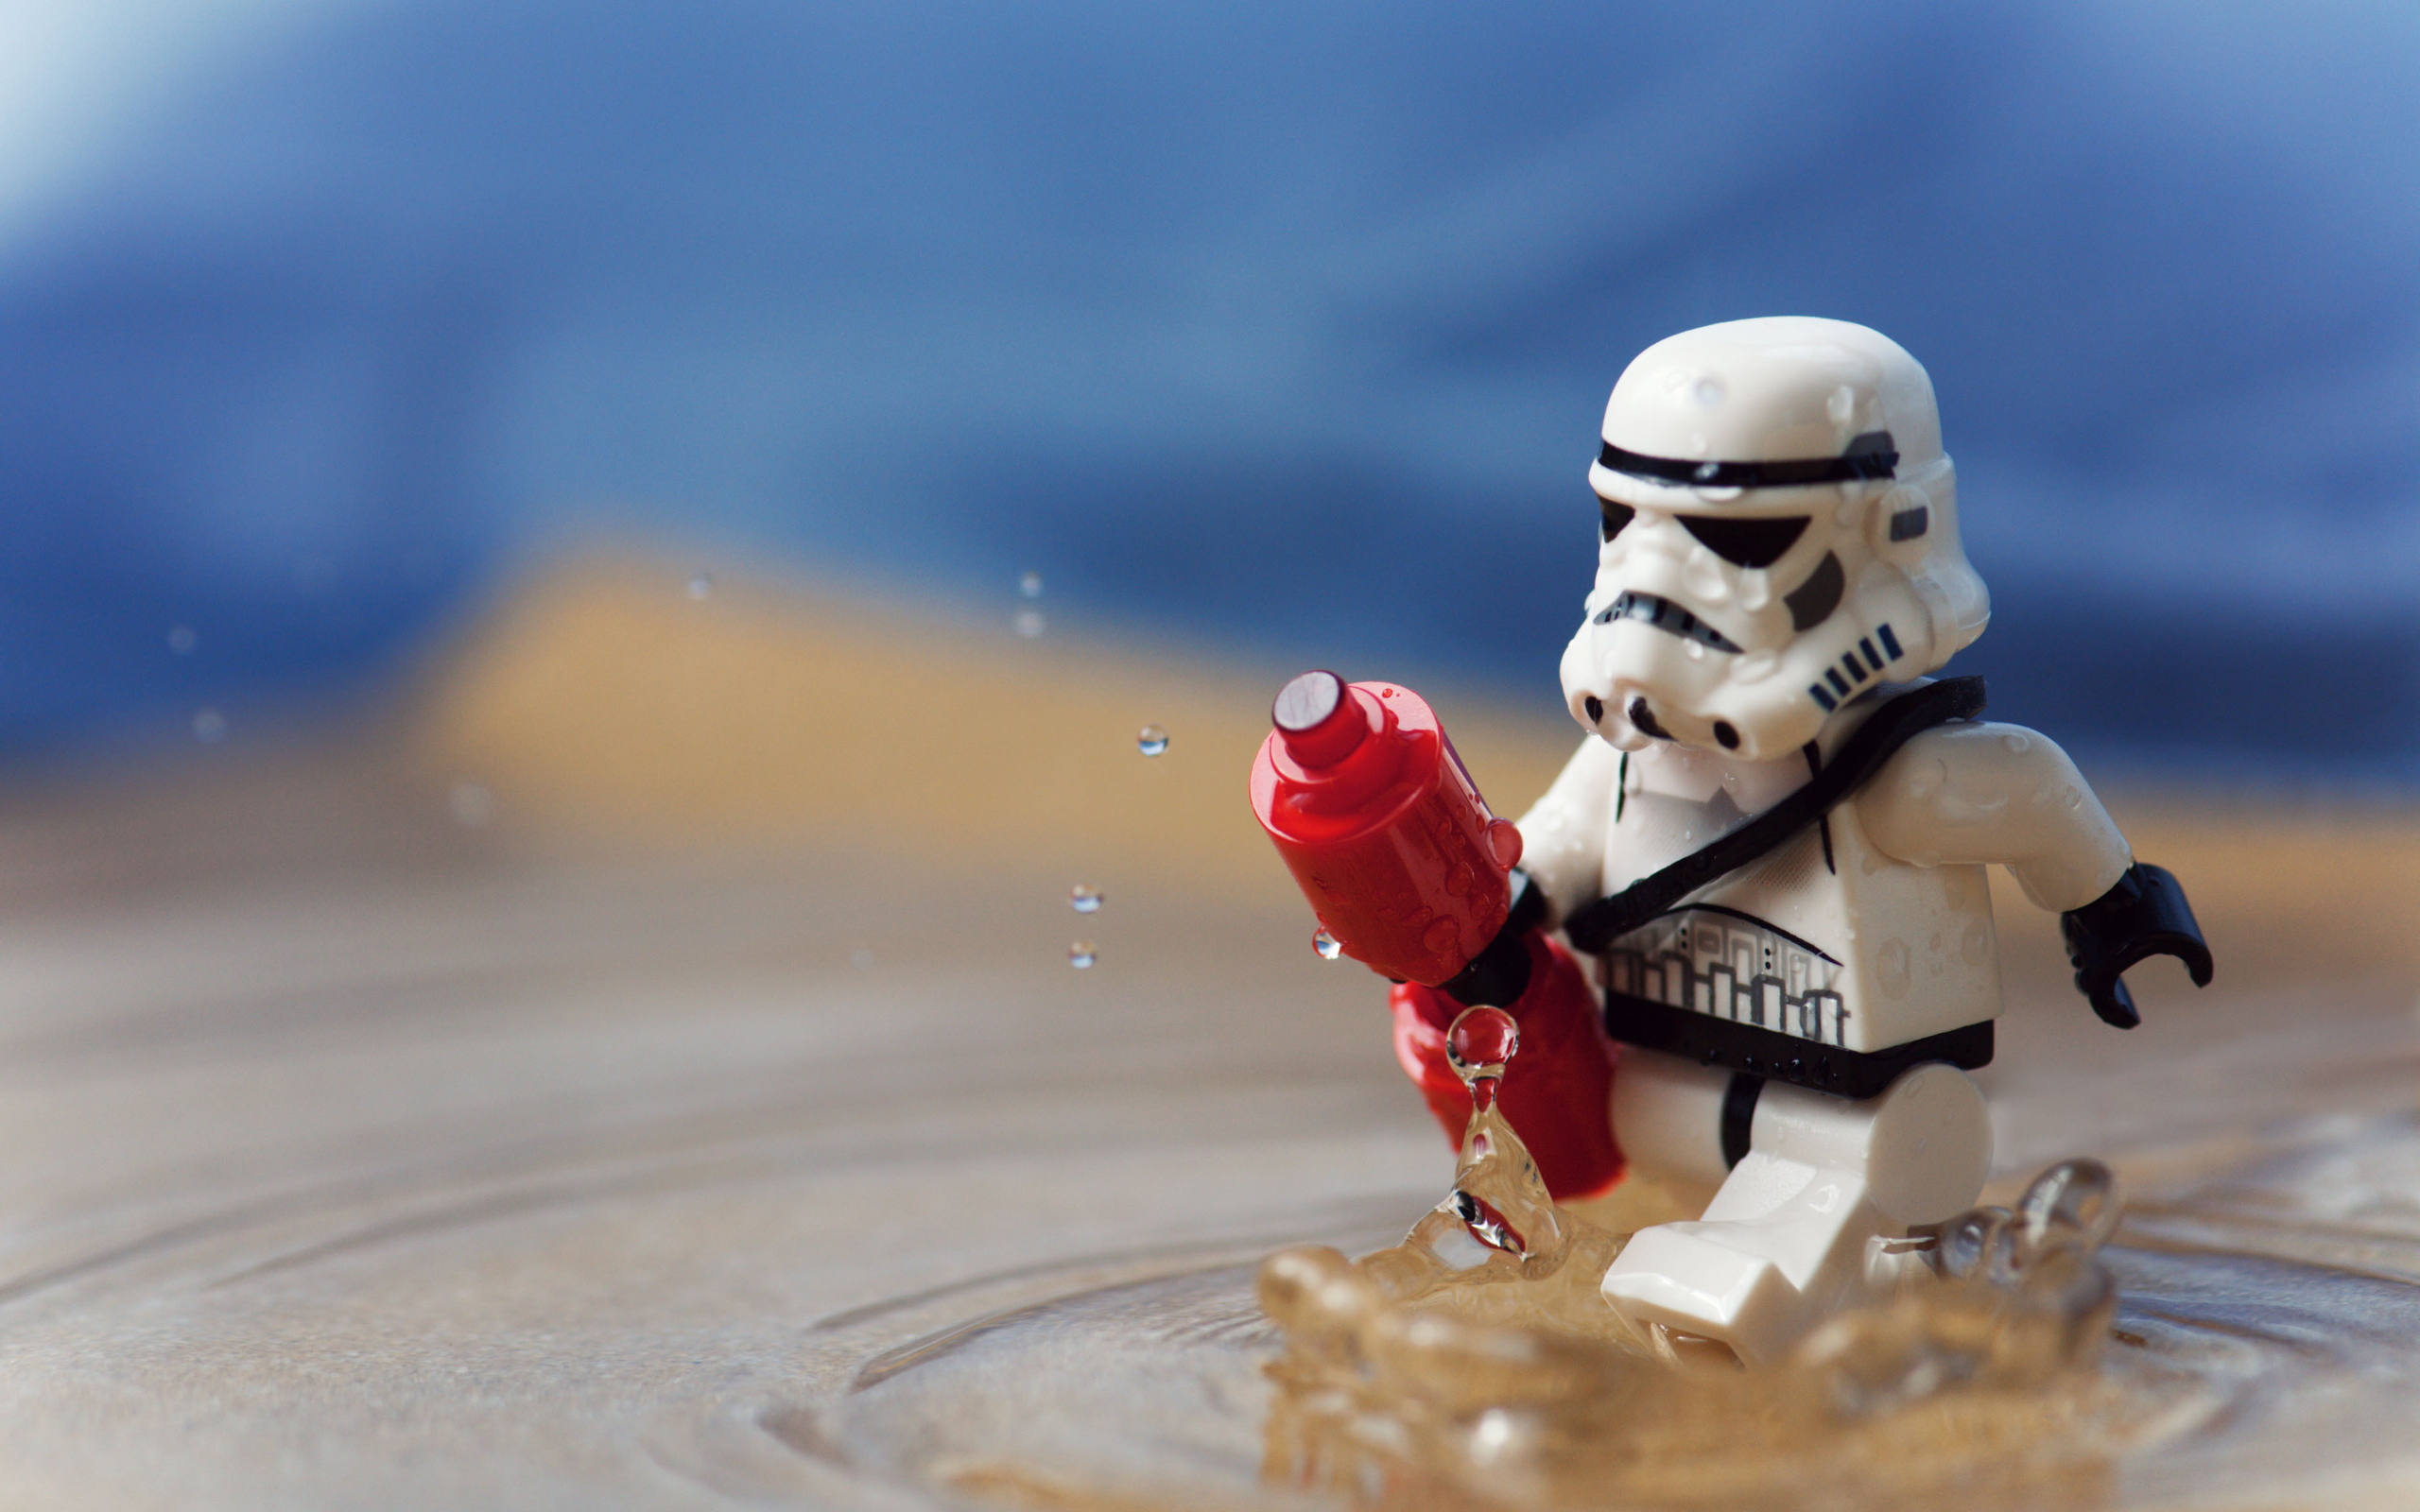 Cool Lego Star Wars Wallpapers 10